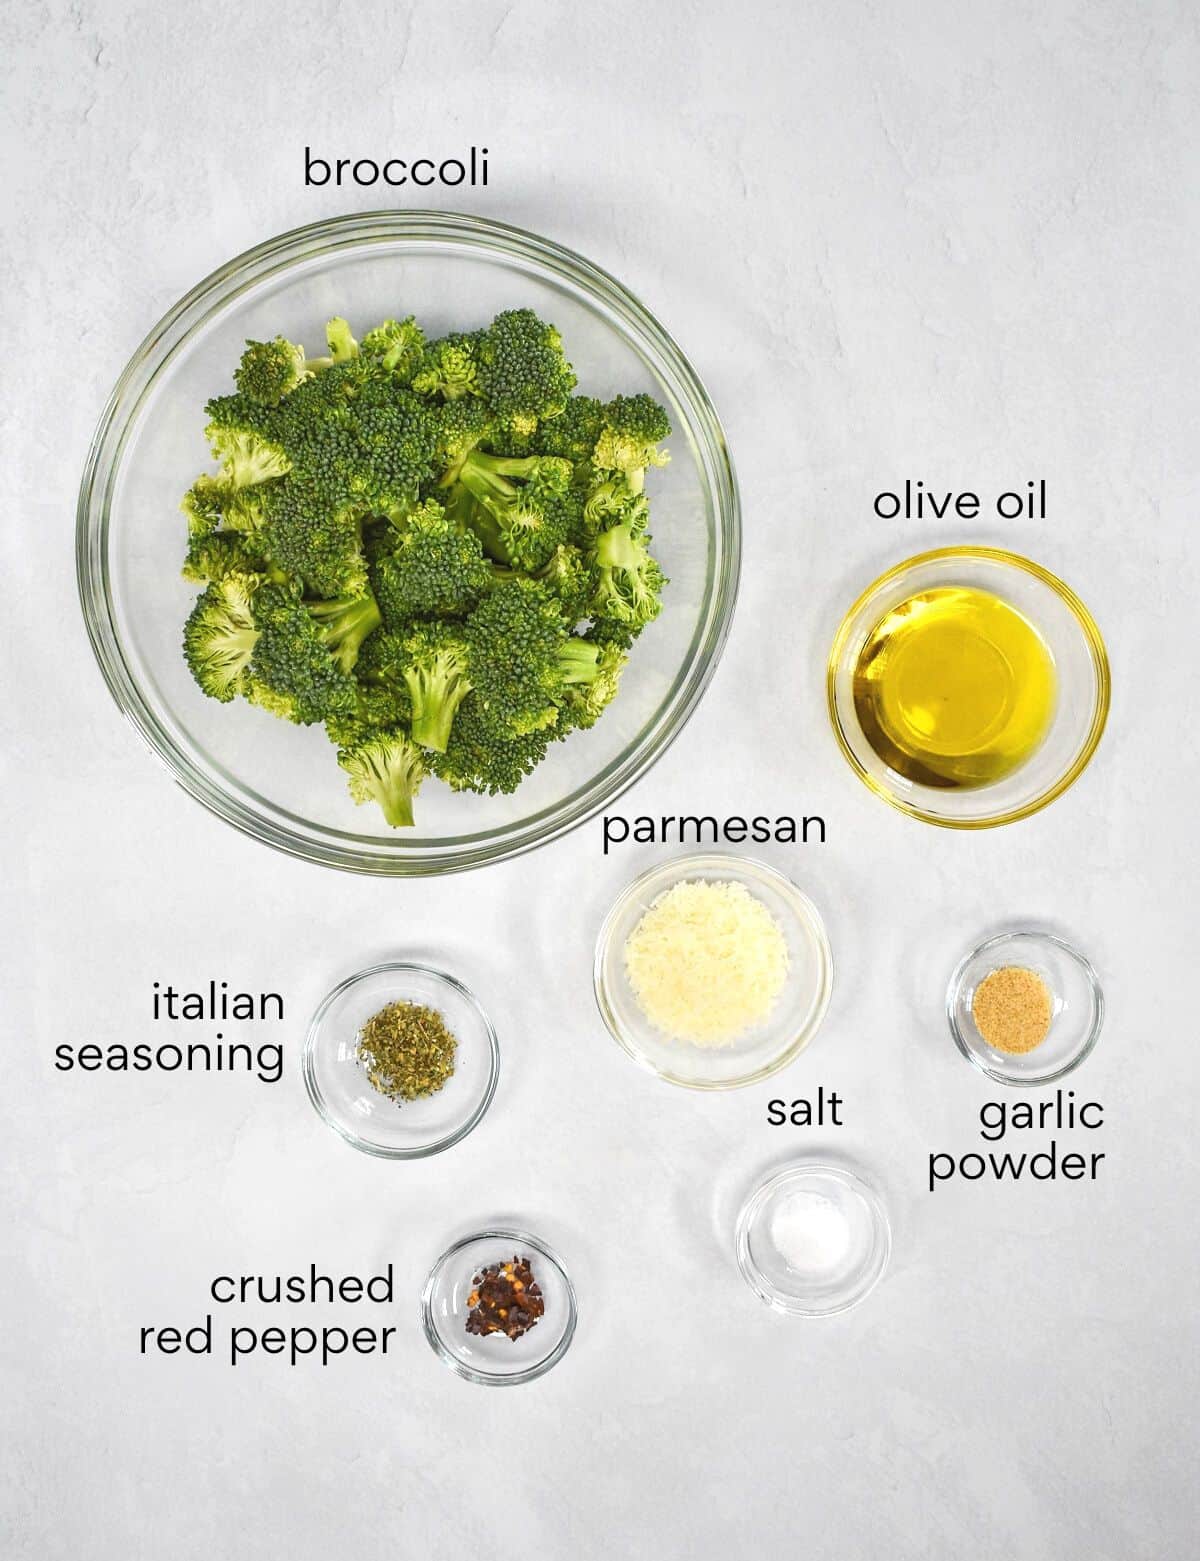 The ingredients for the roasted broccoli prepped and arranged in glass bowls on a white table. Each ingredient is labeled with small black letters.